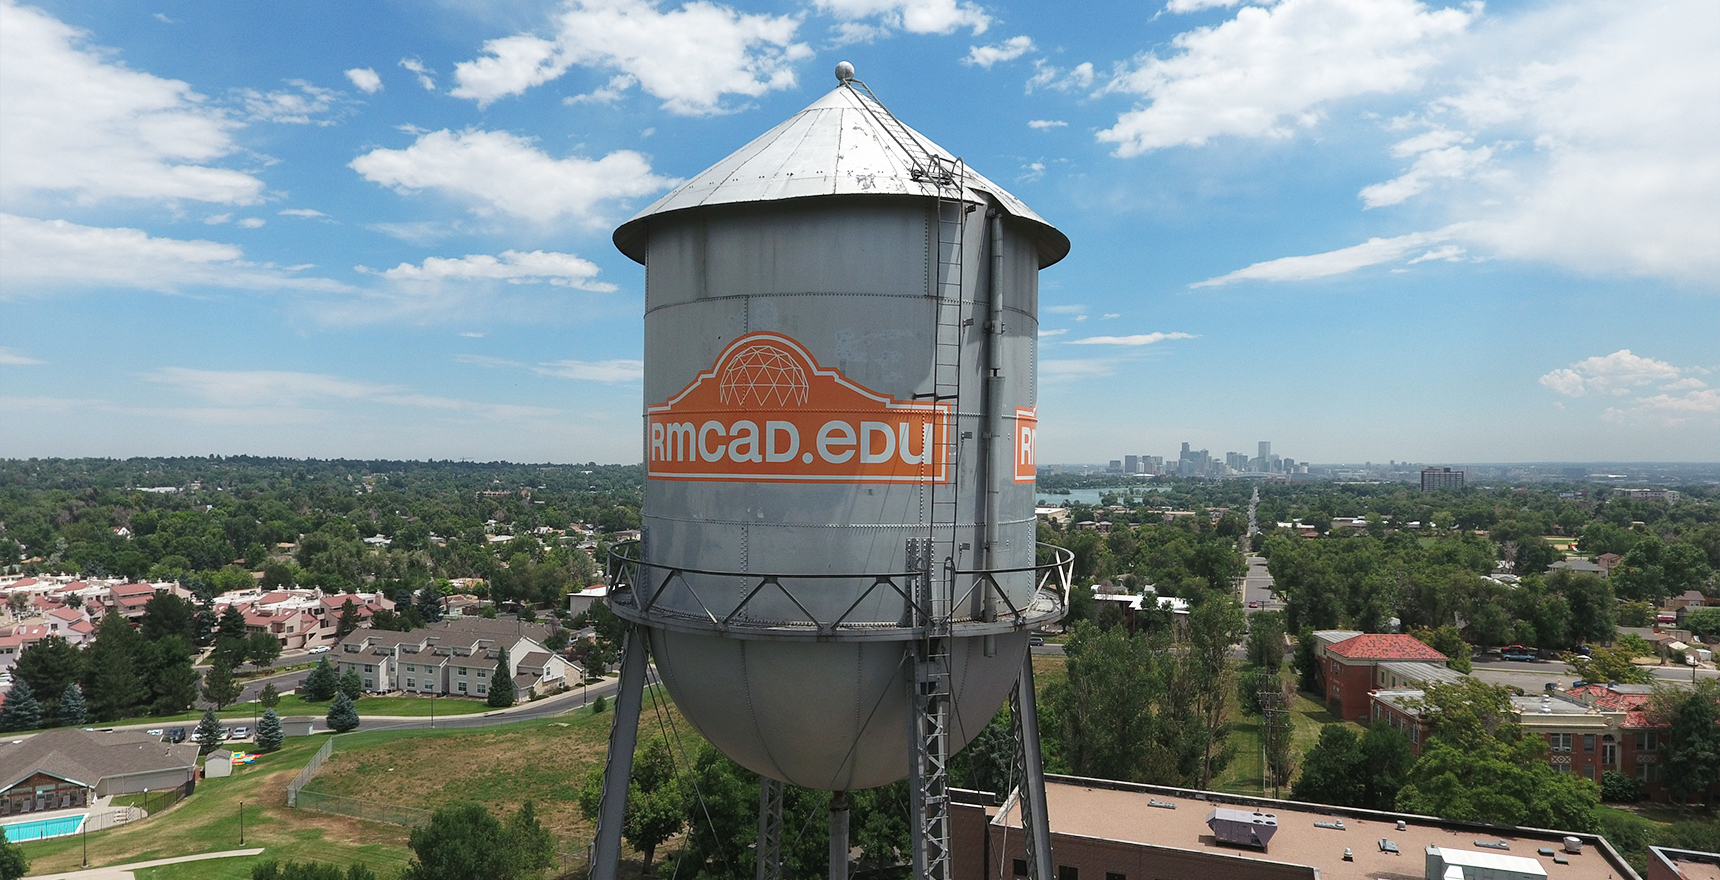 RMCAD water tower